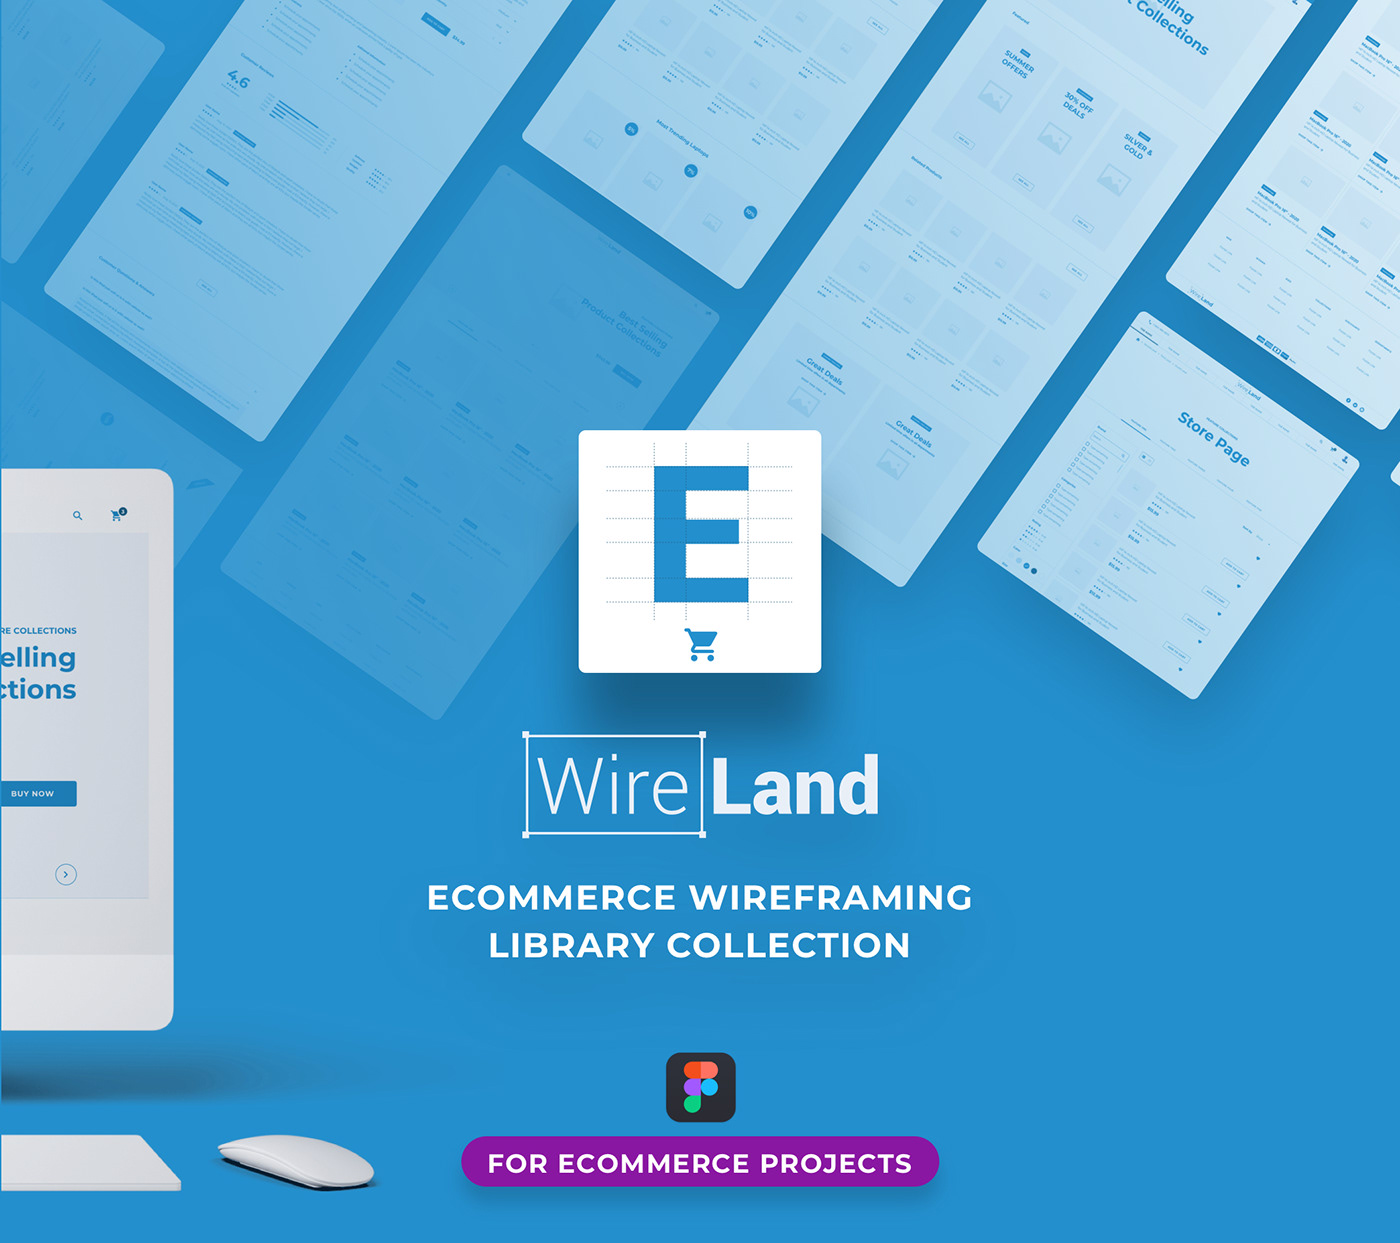 Wireland for Ecommerce - Massive Wireframe Library Collection - 1